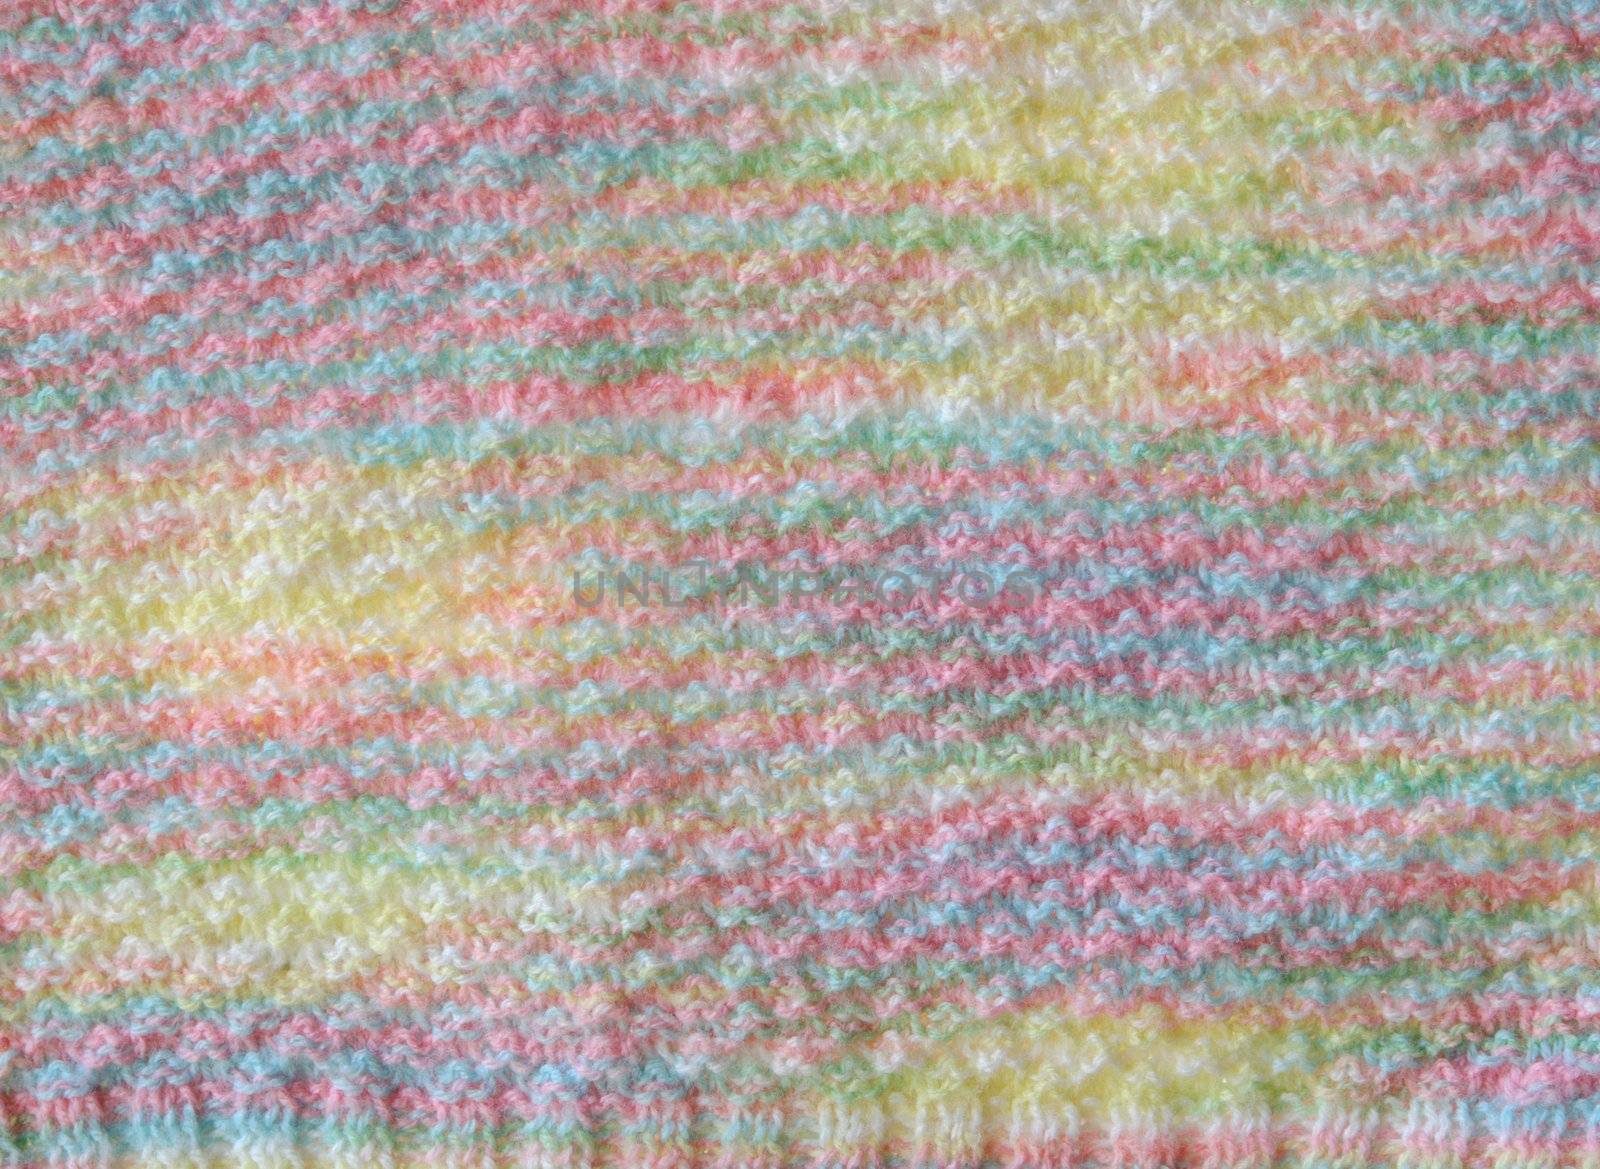 close-up of a soft hand-knit sweater in pastel shades of yellow, blue, pink and green